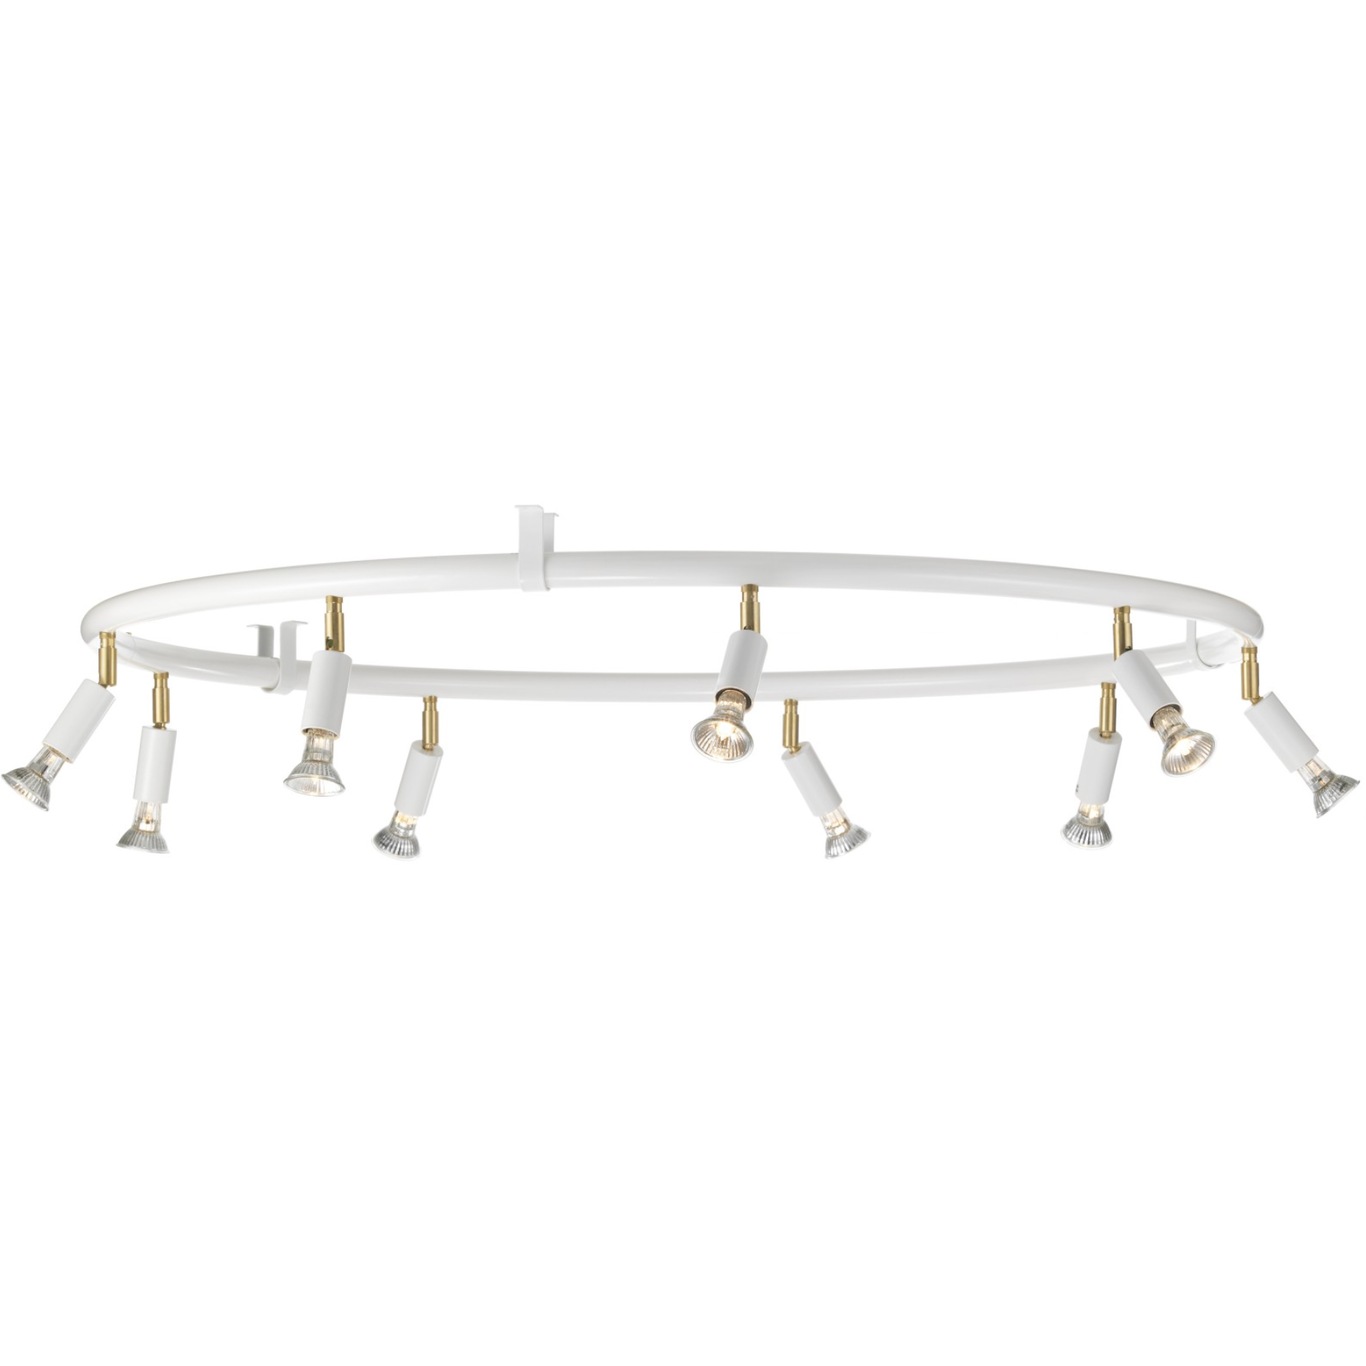 Star 9 Wall/Ceiling Lamp, White